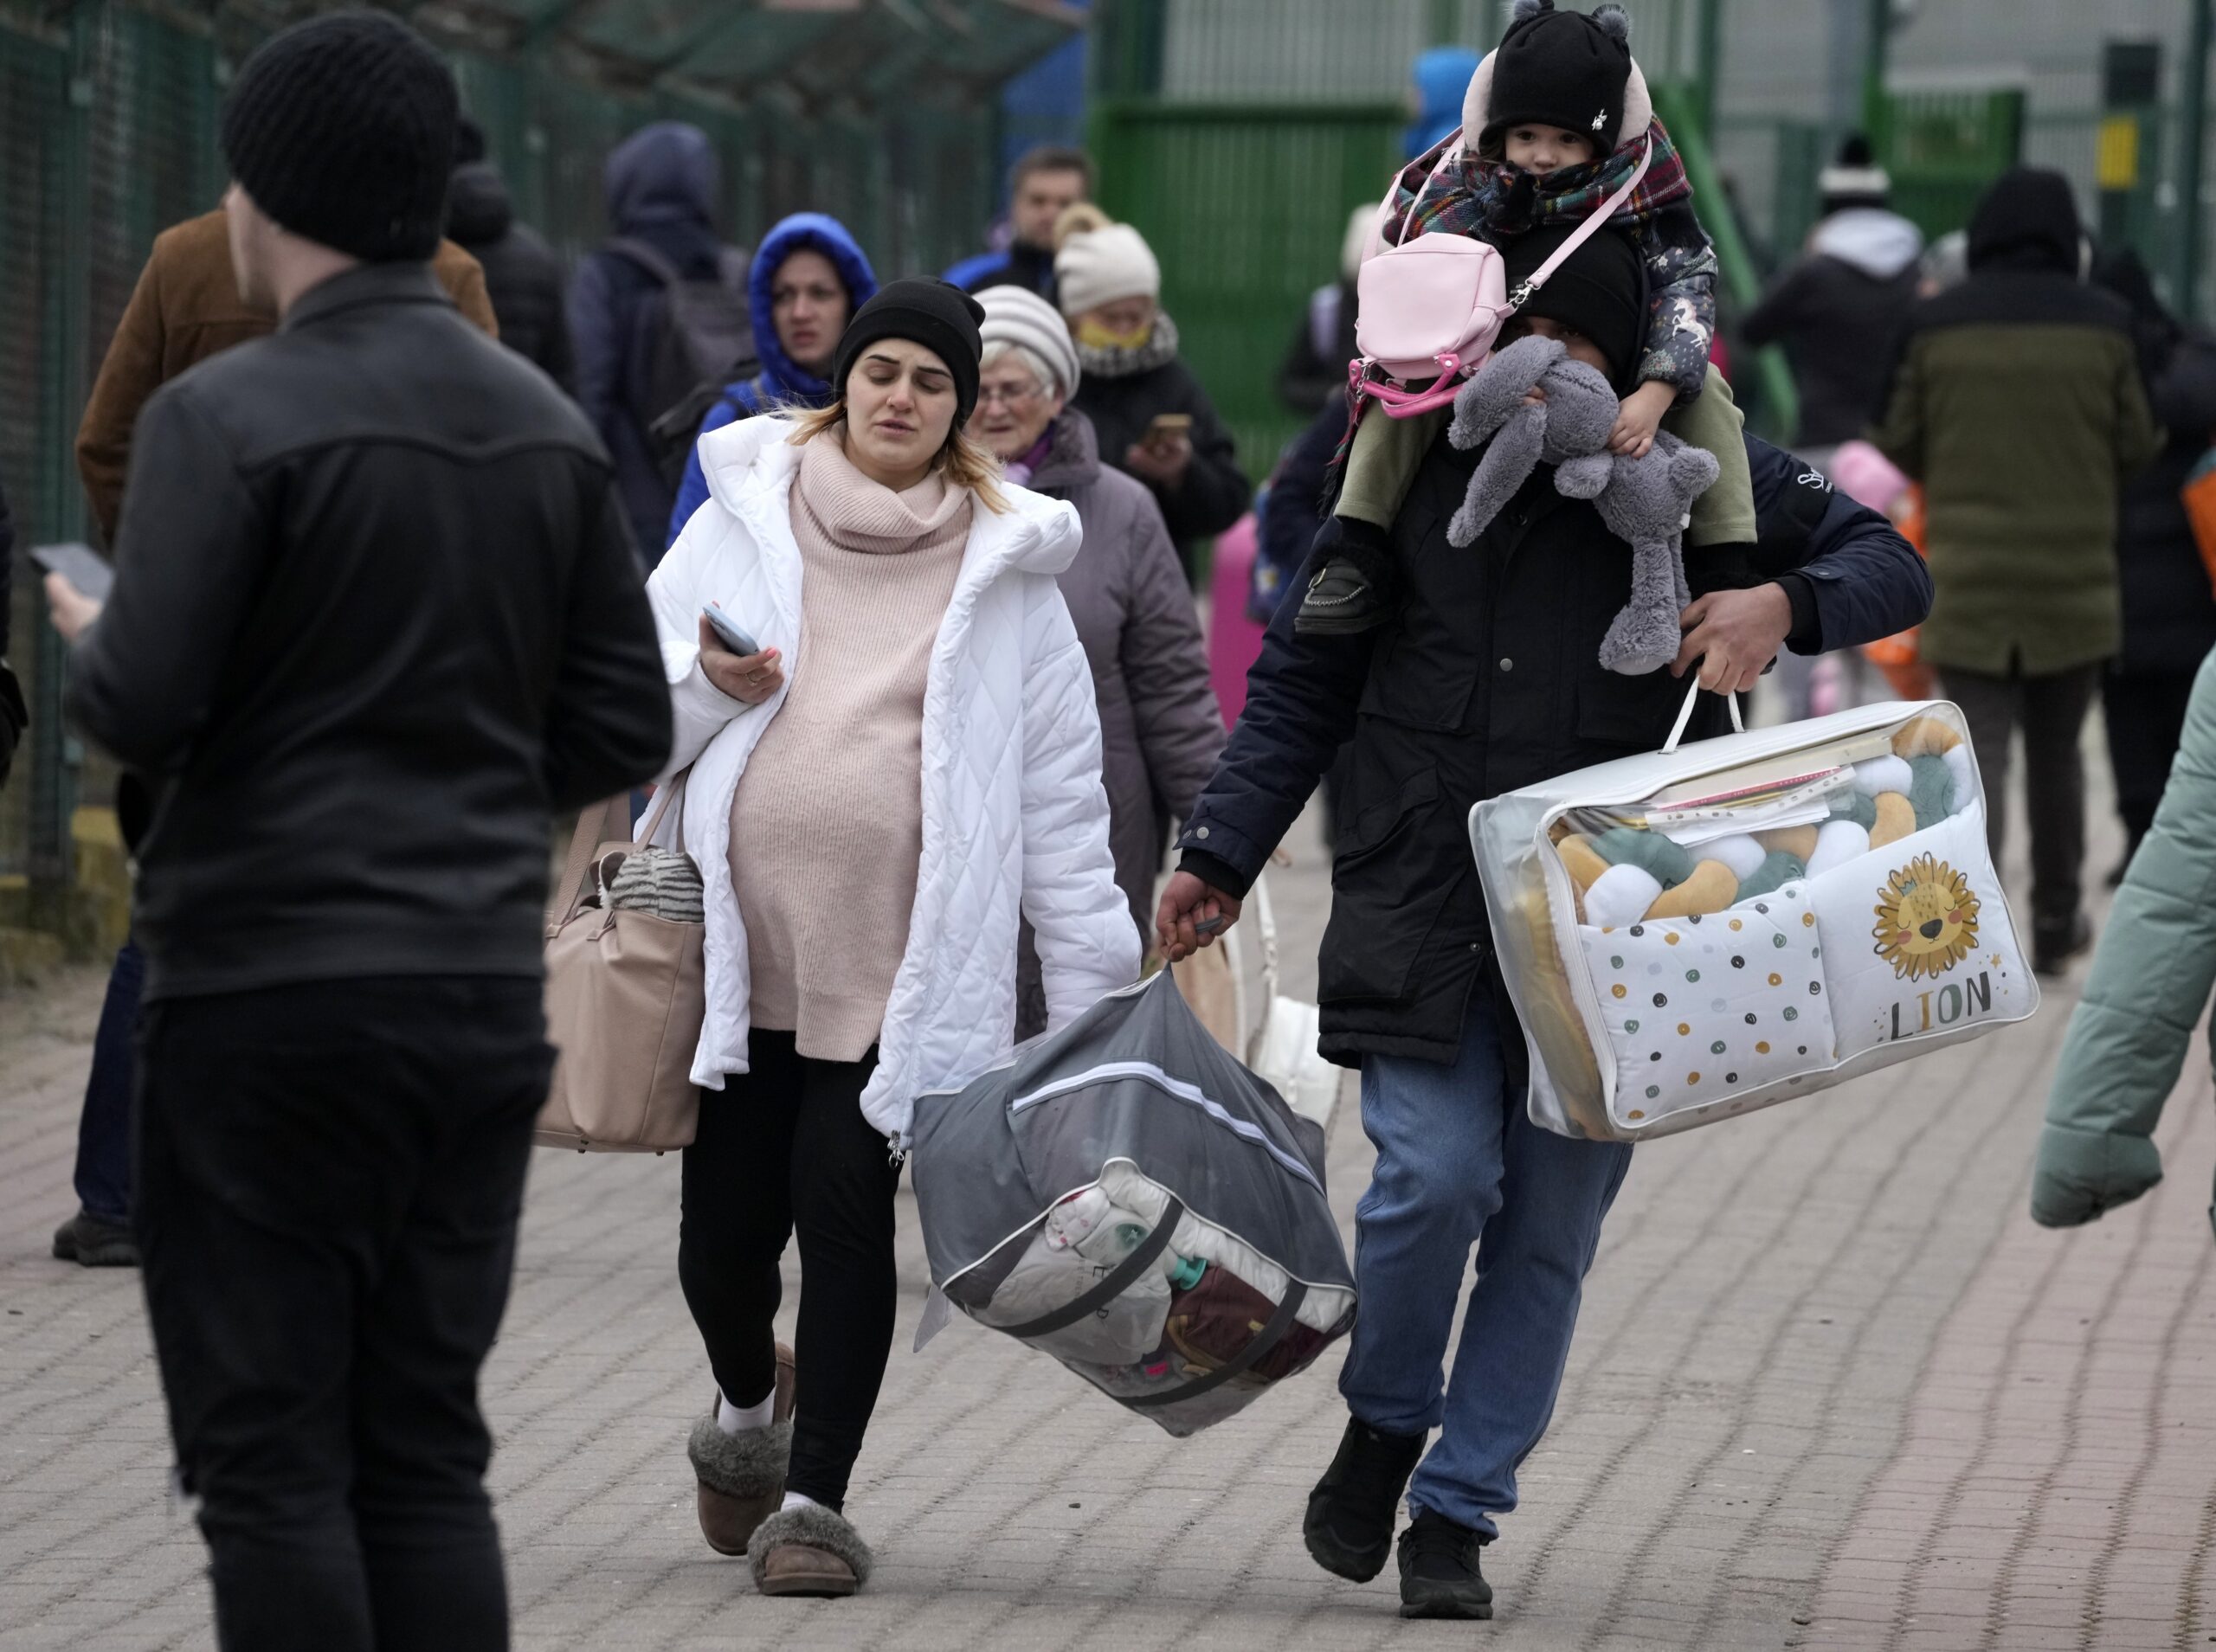 People fleeing the conflict from neighboring Ukraine, arrive at the border crossing in Medyka, southeastern Poland, on Friday, Feb. 25, 2022. U.N. officials said that 100,000 people were believed to have left their homes and estimated up to 4 million could flee if the fighting escalates.(AP Photo/Czarek Sokolowski)